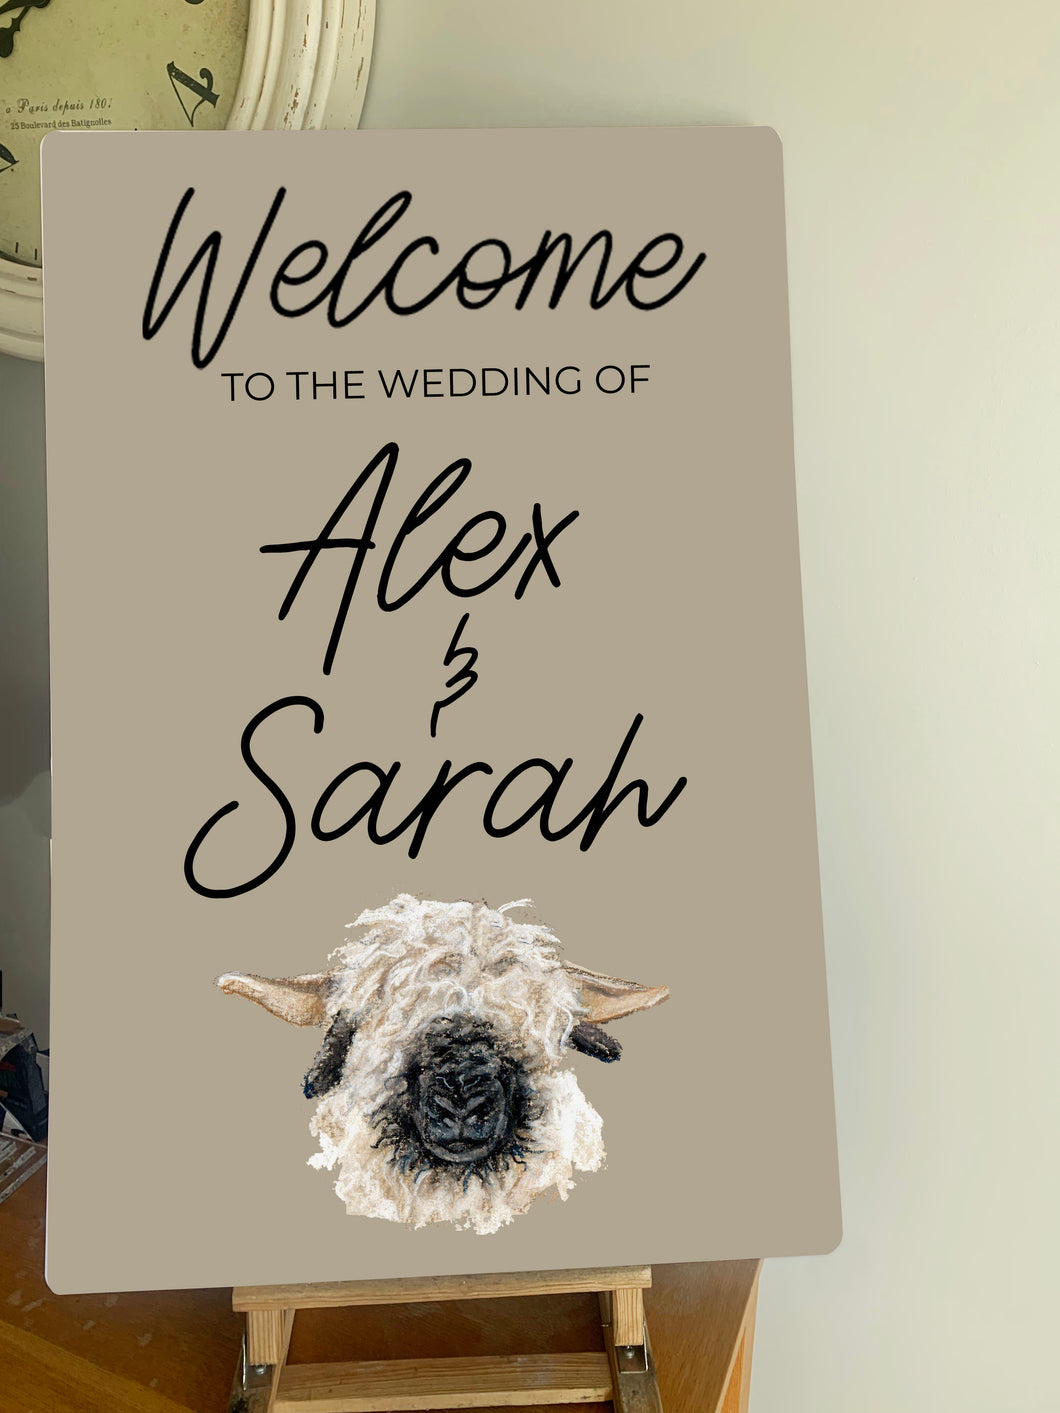 Sheep Head Farming Themed Wedding Welcome Sign - Various Breeds Available